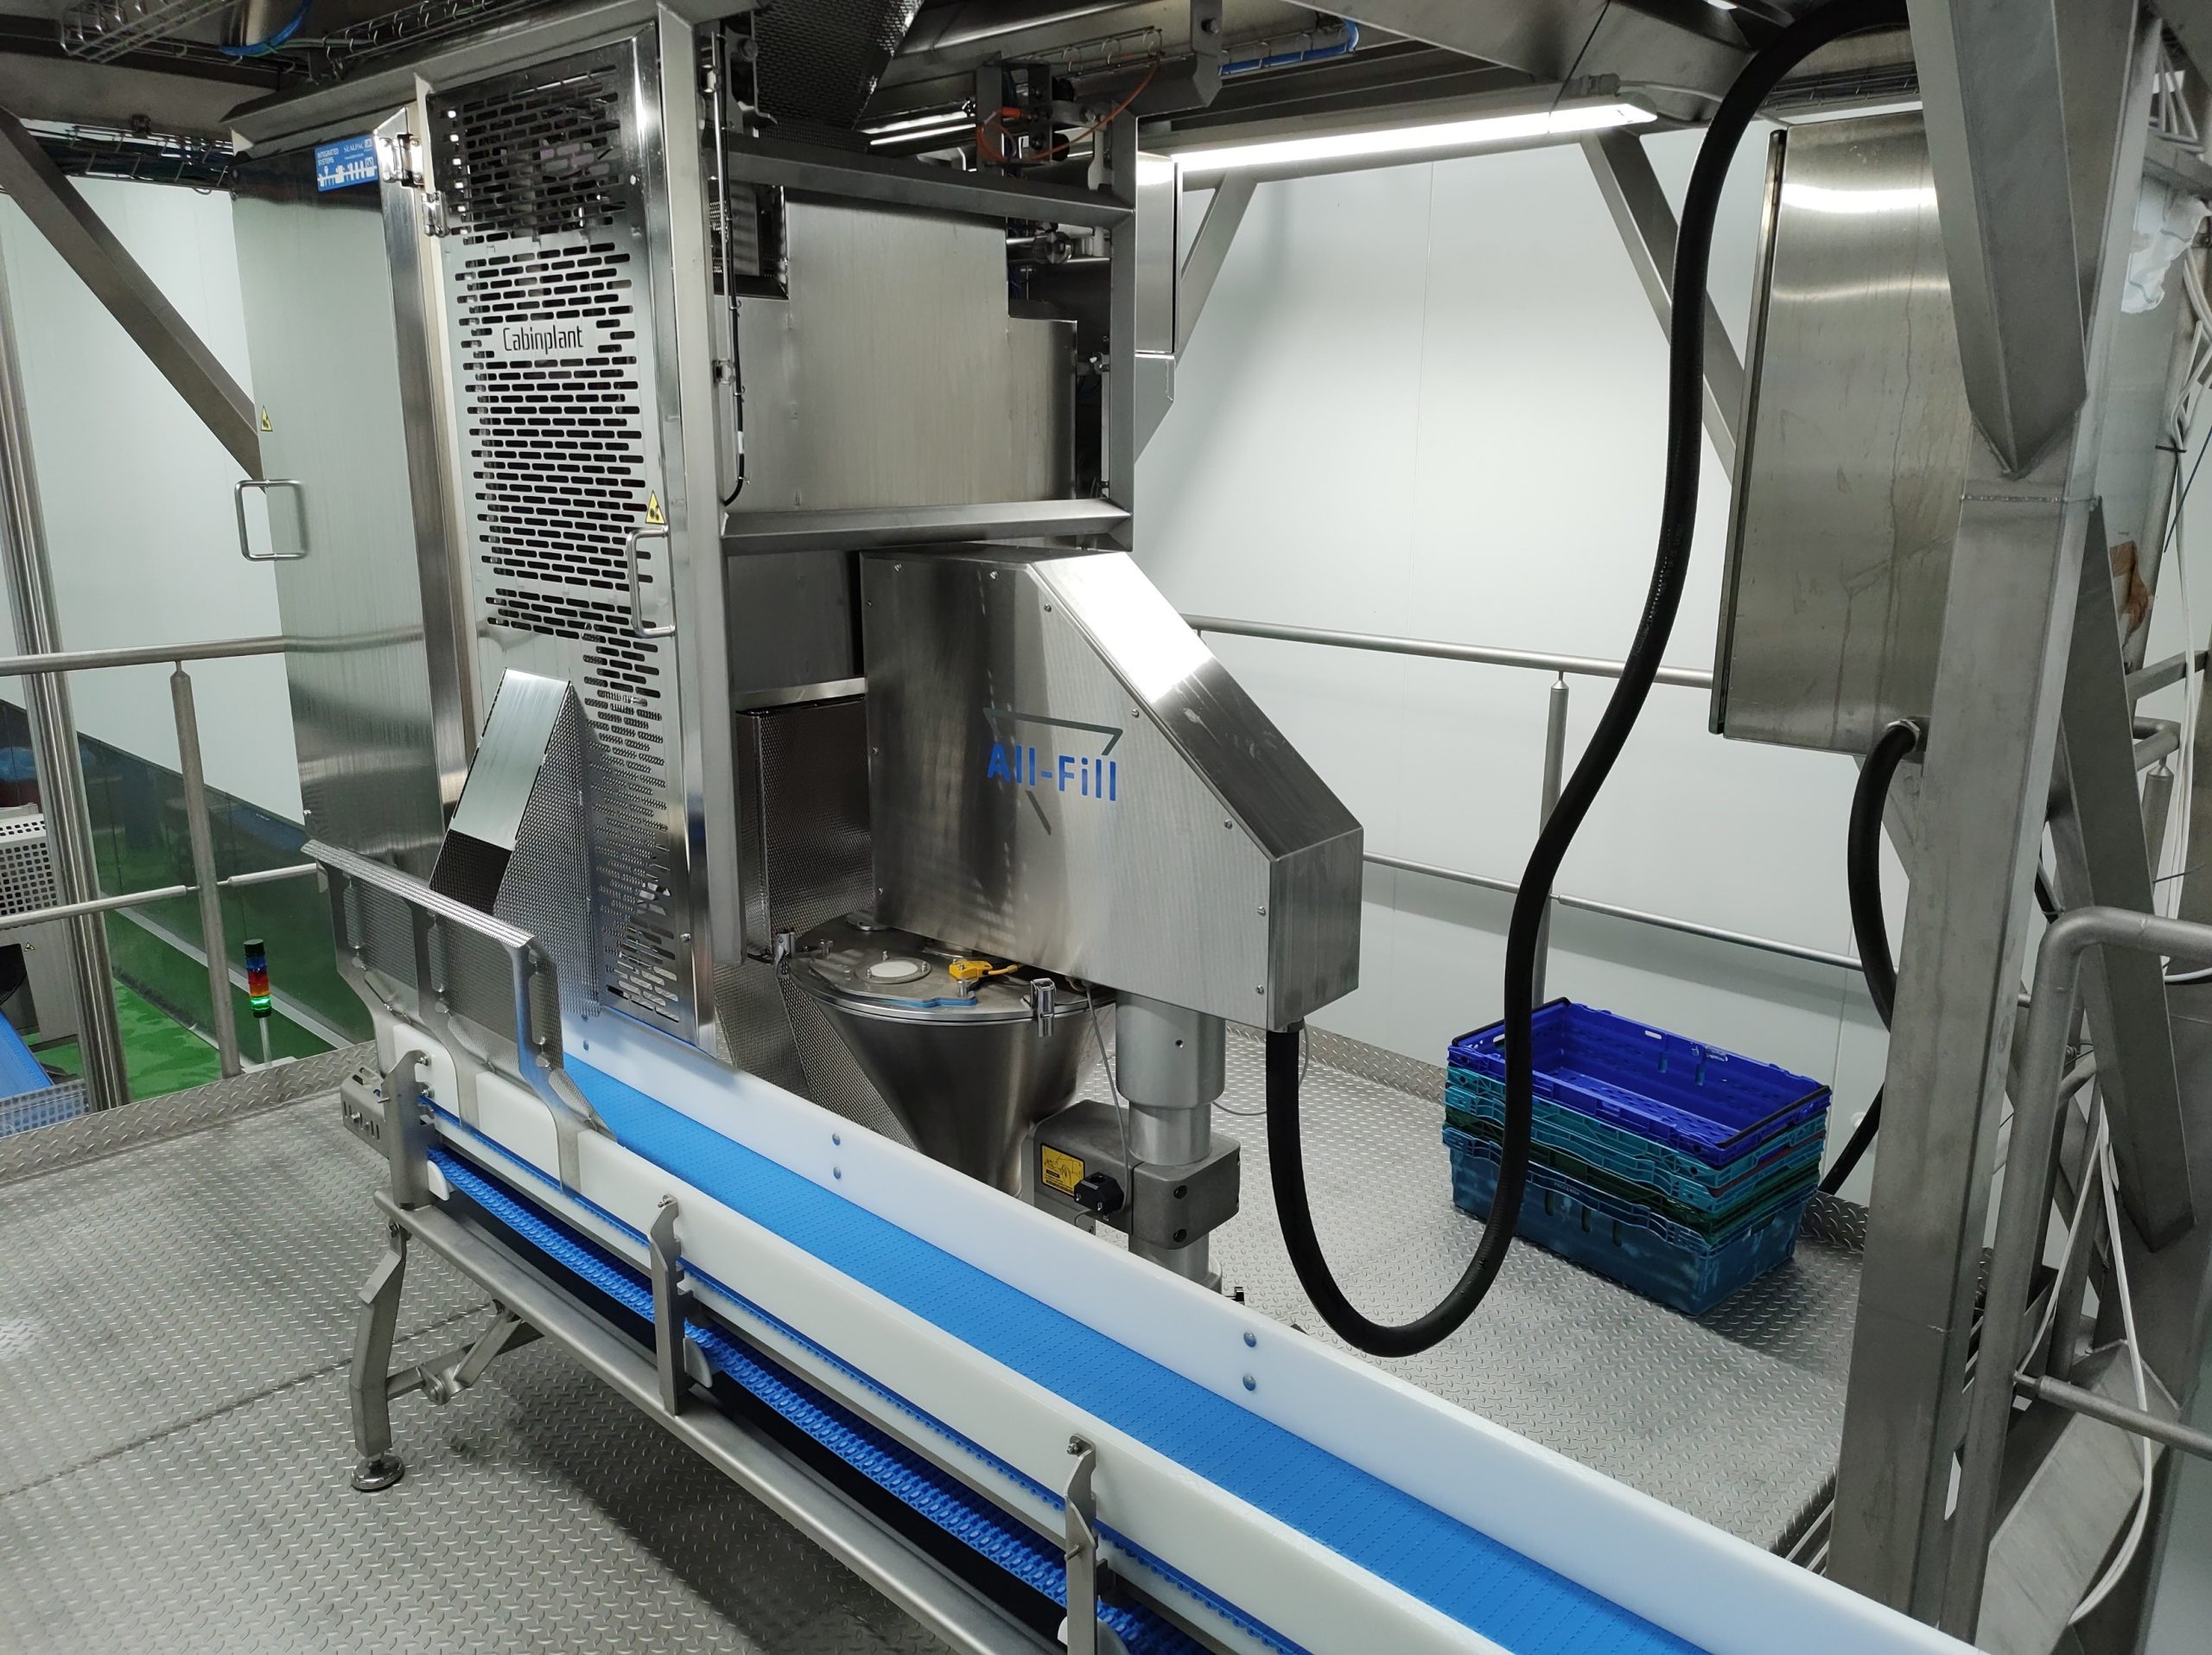 NEWS | Avara Foods has invested around £2m in automation, people and packaging at its Herefordshire site